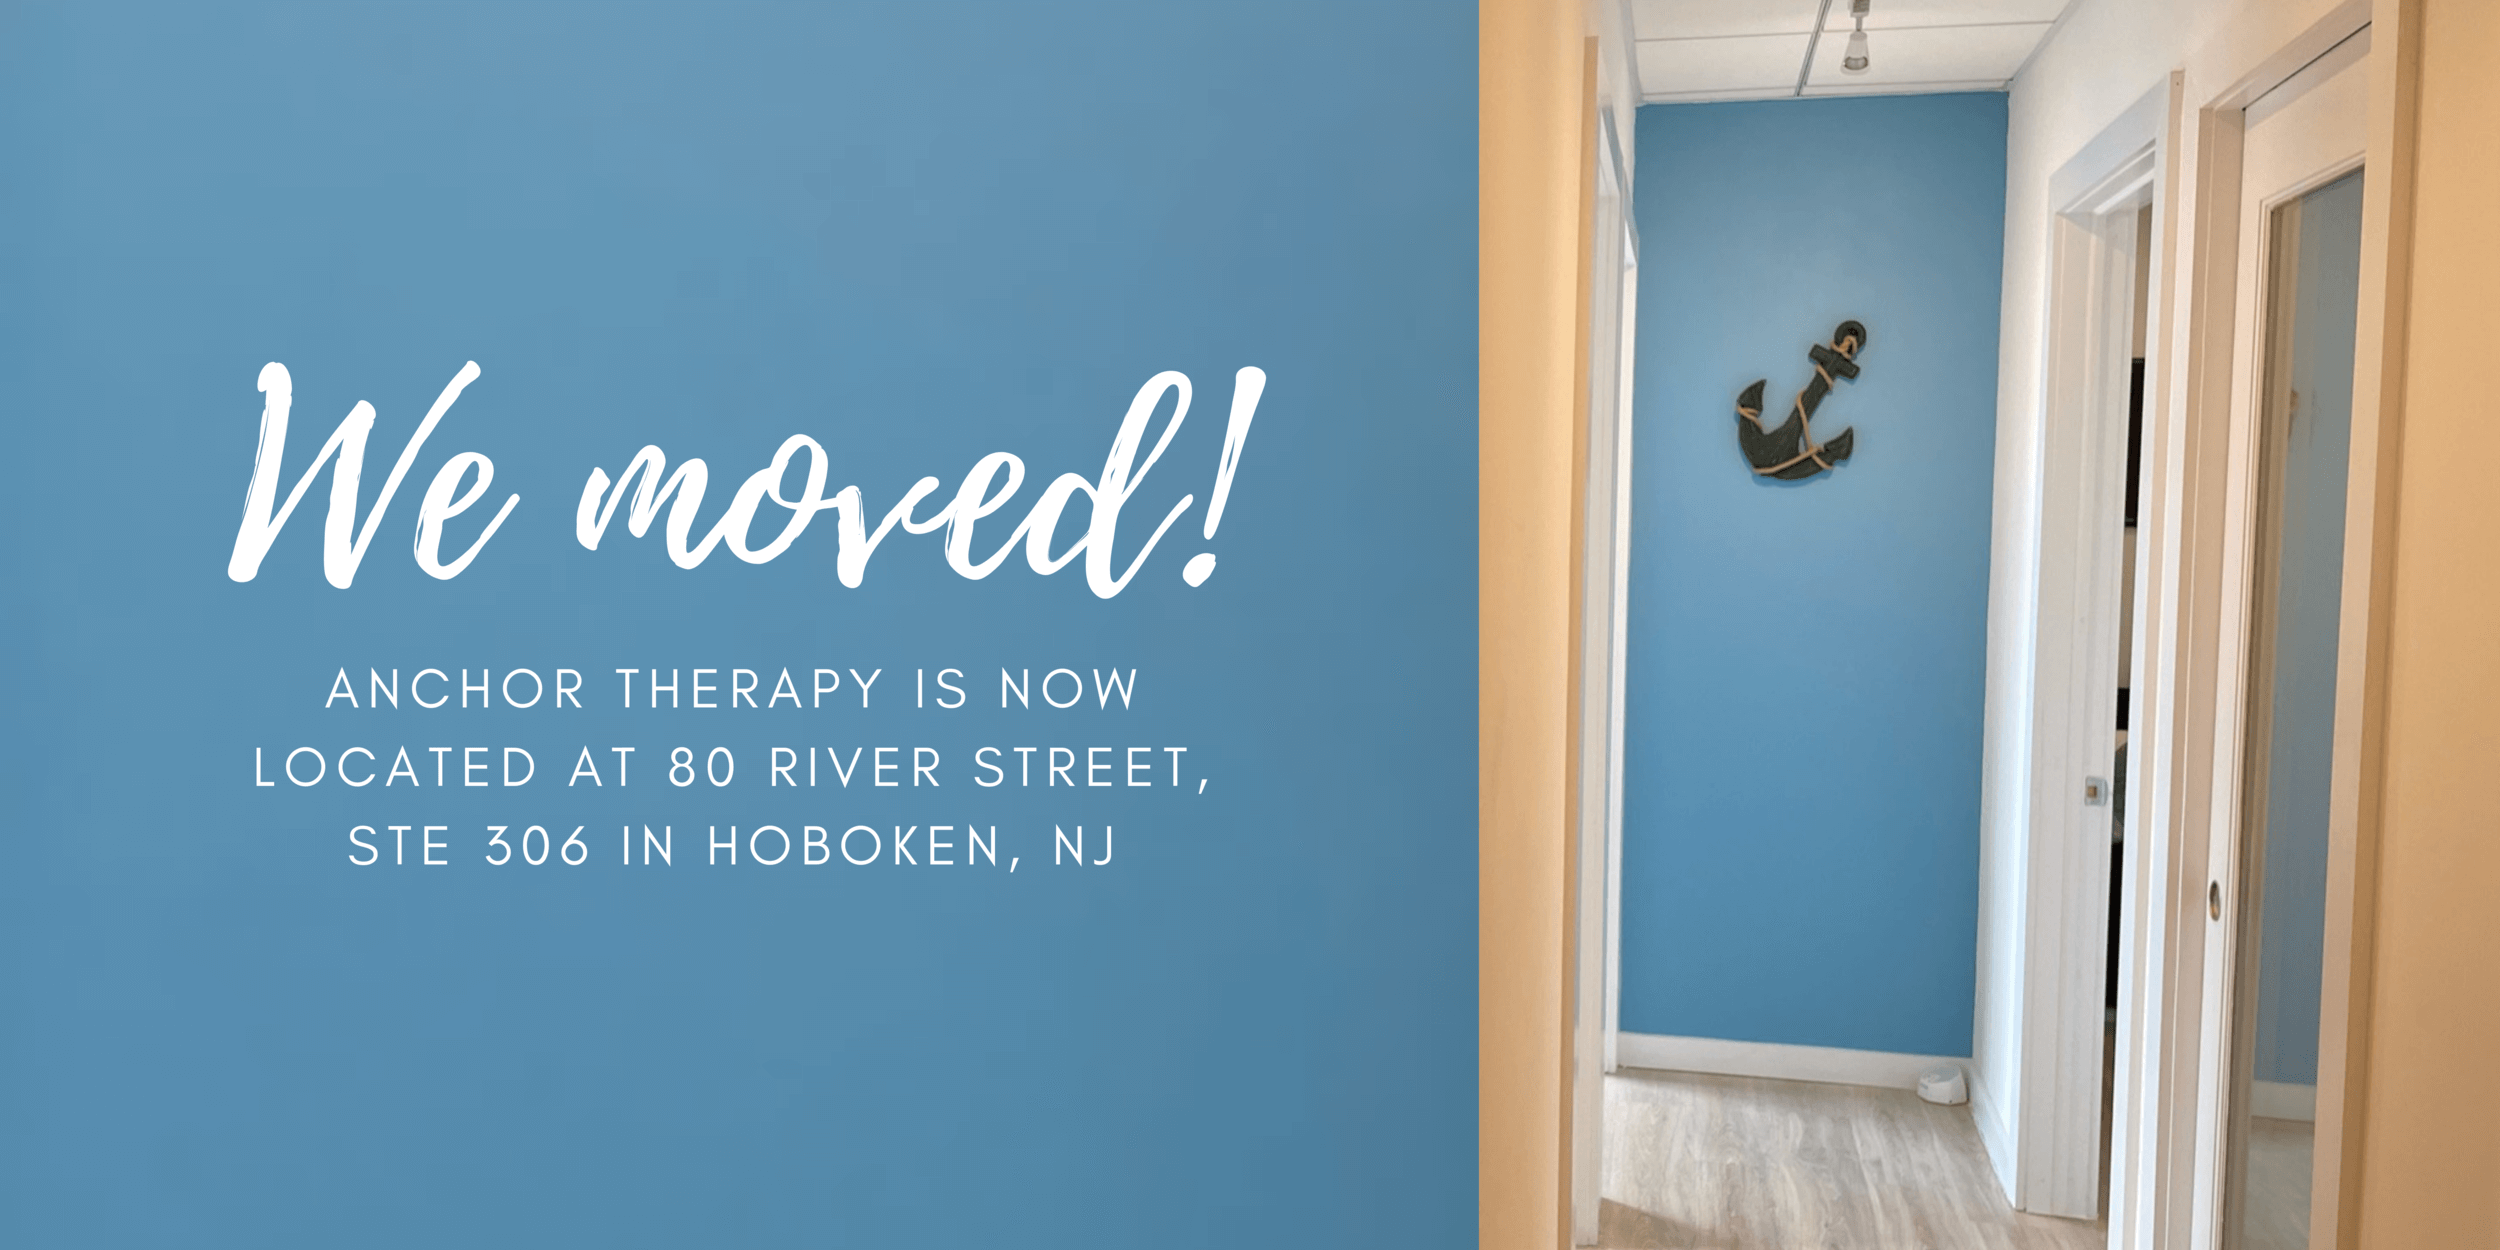 Anchor Therapy moved locations to 80 River Street Ste 306 in Hoboken NJ!